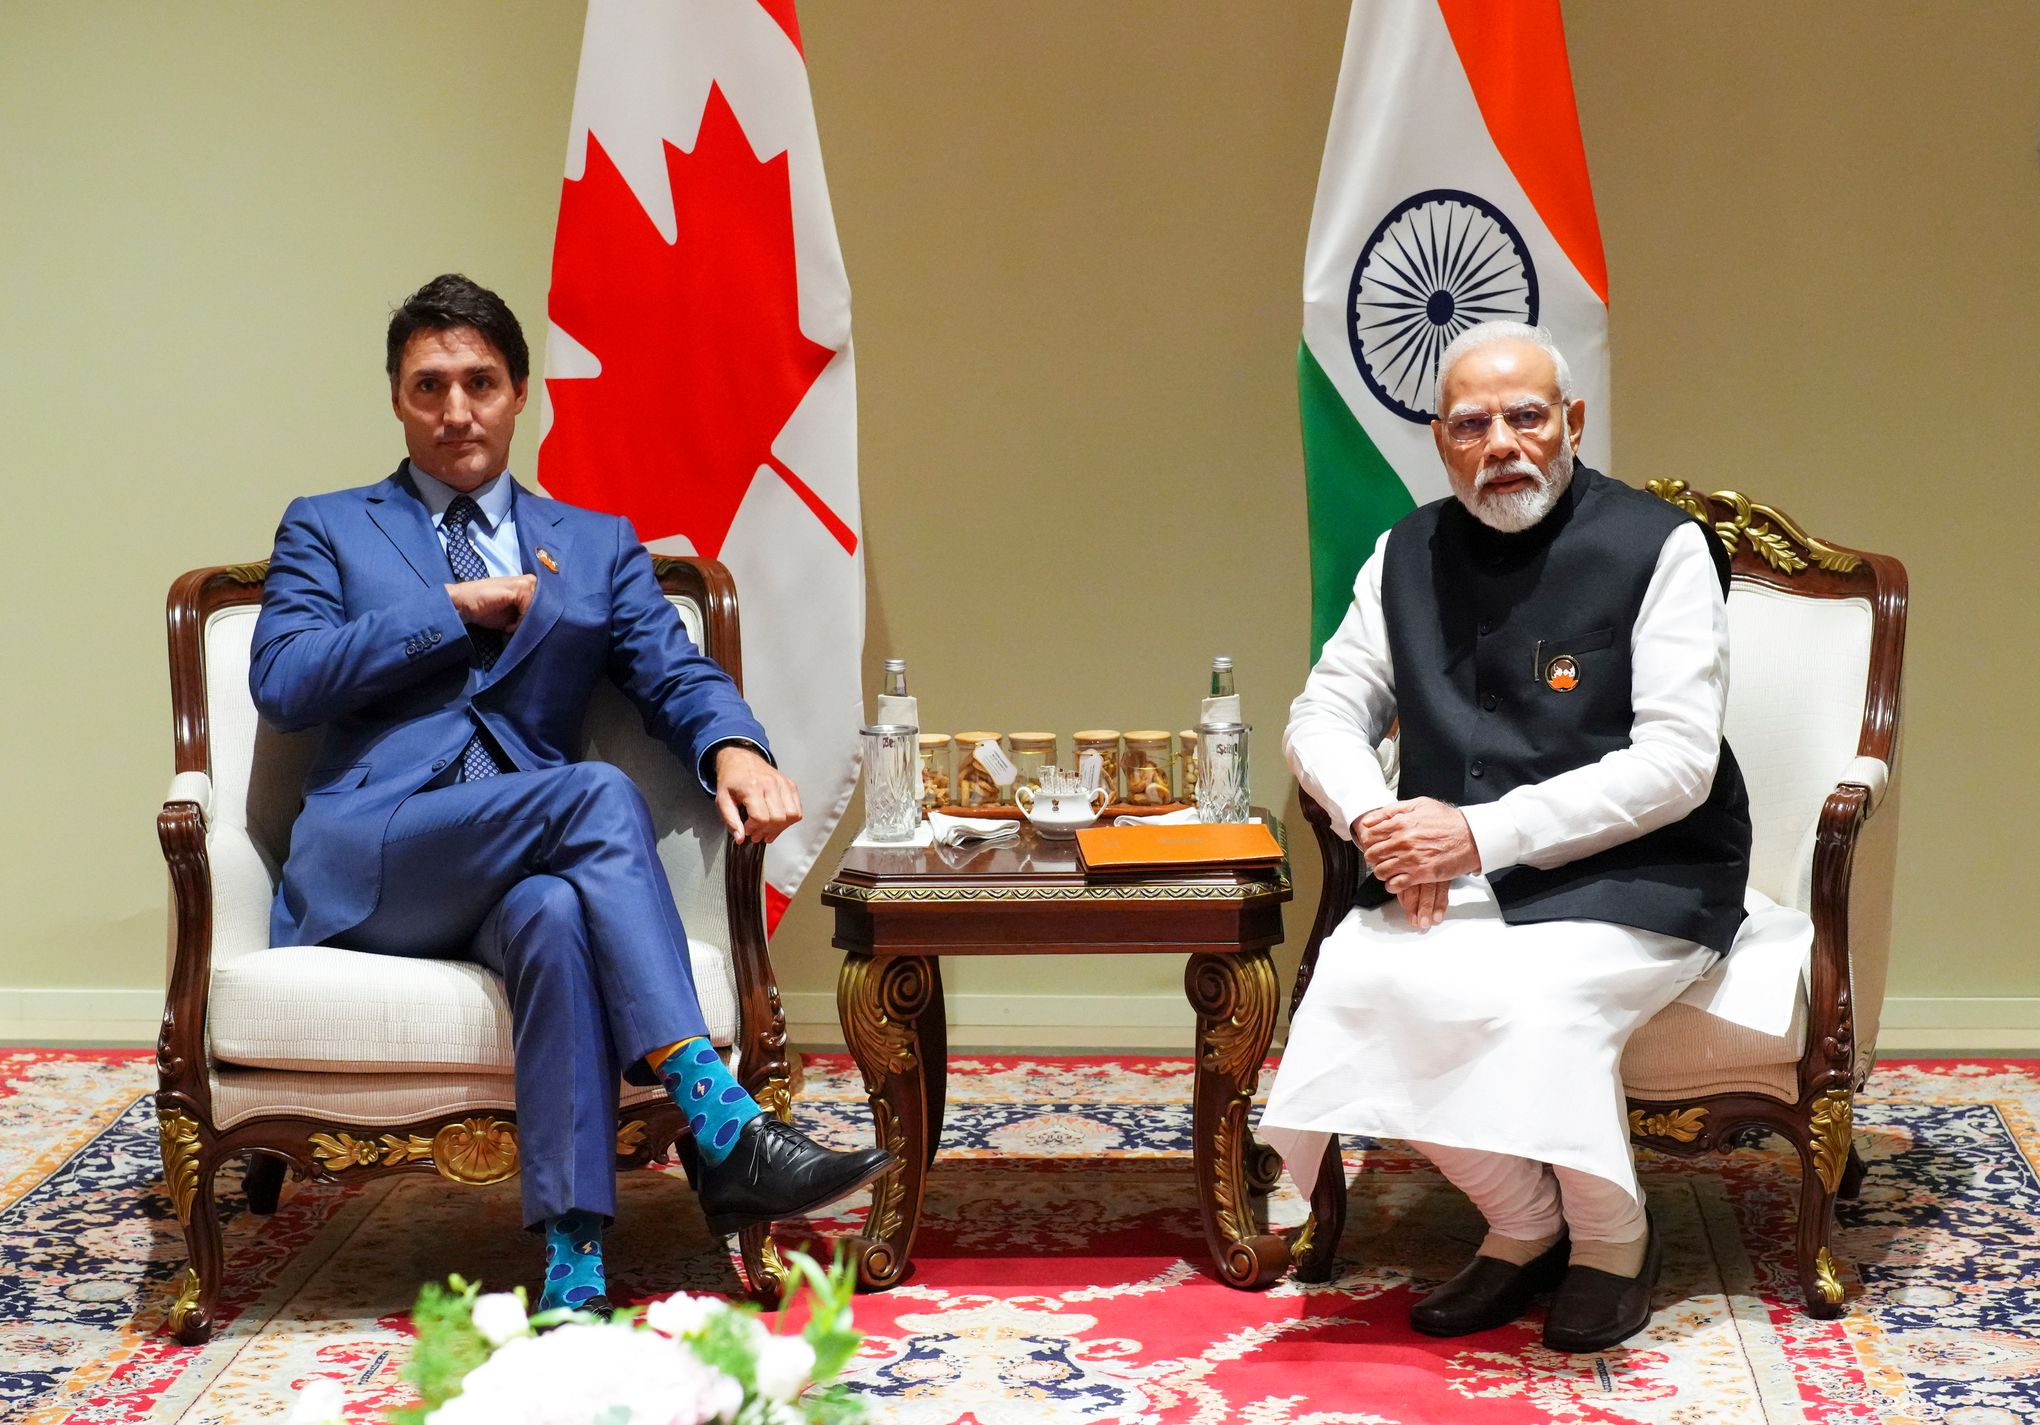 India expels Canadian diplomat, escalating tensions after Trudeau accuses  India in Sikh's killing | The Seattle Times